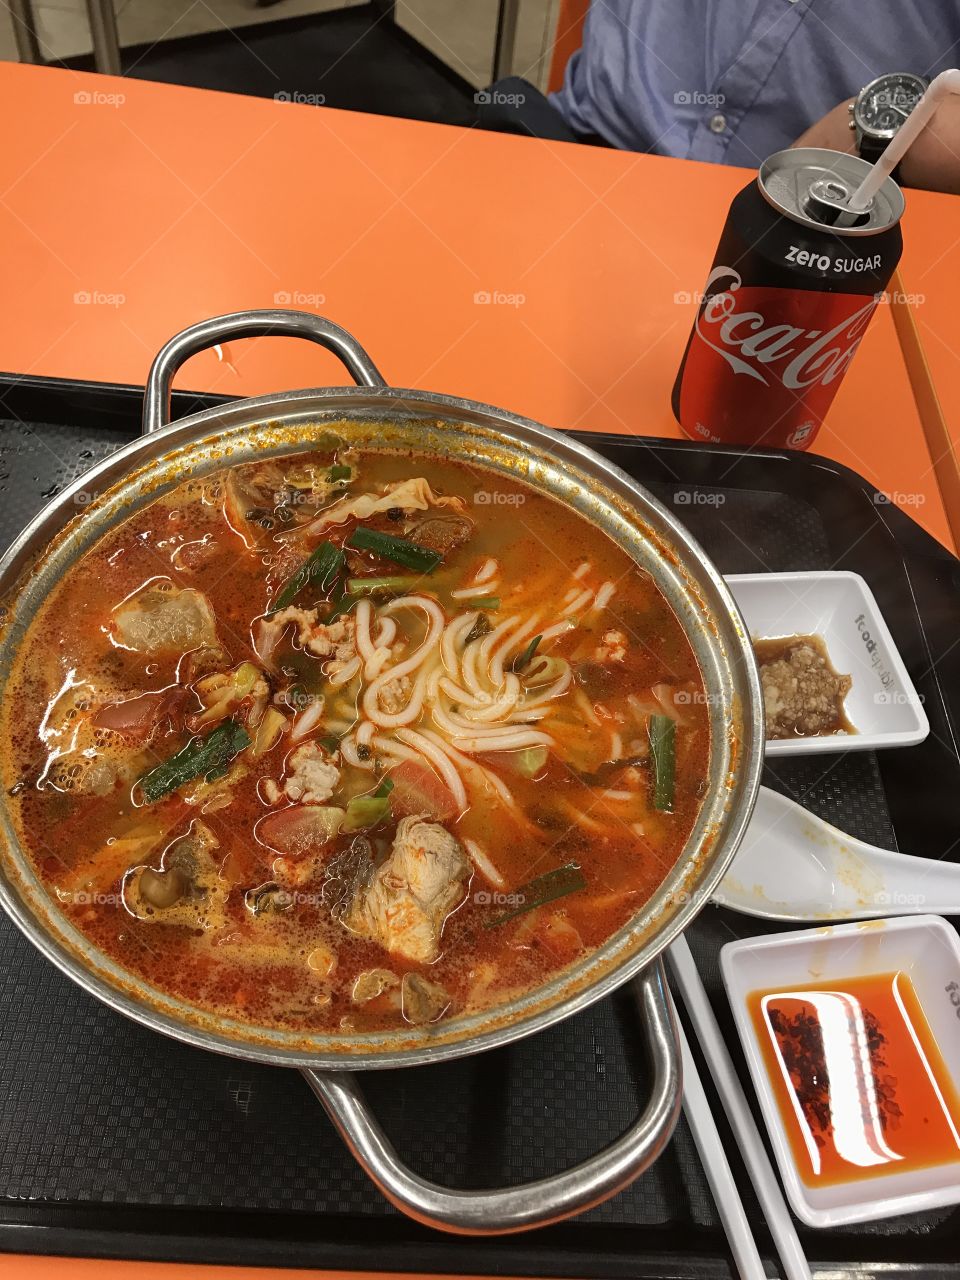 Spicy soup from Hong Kong 